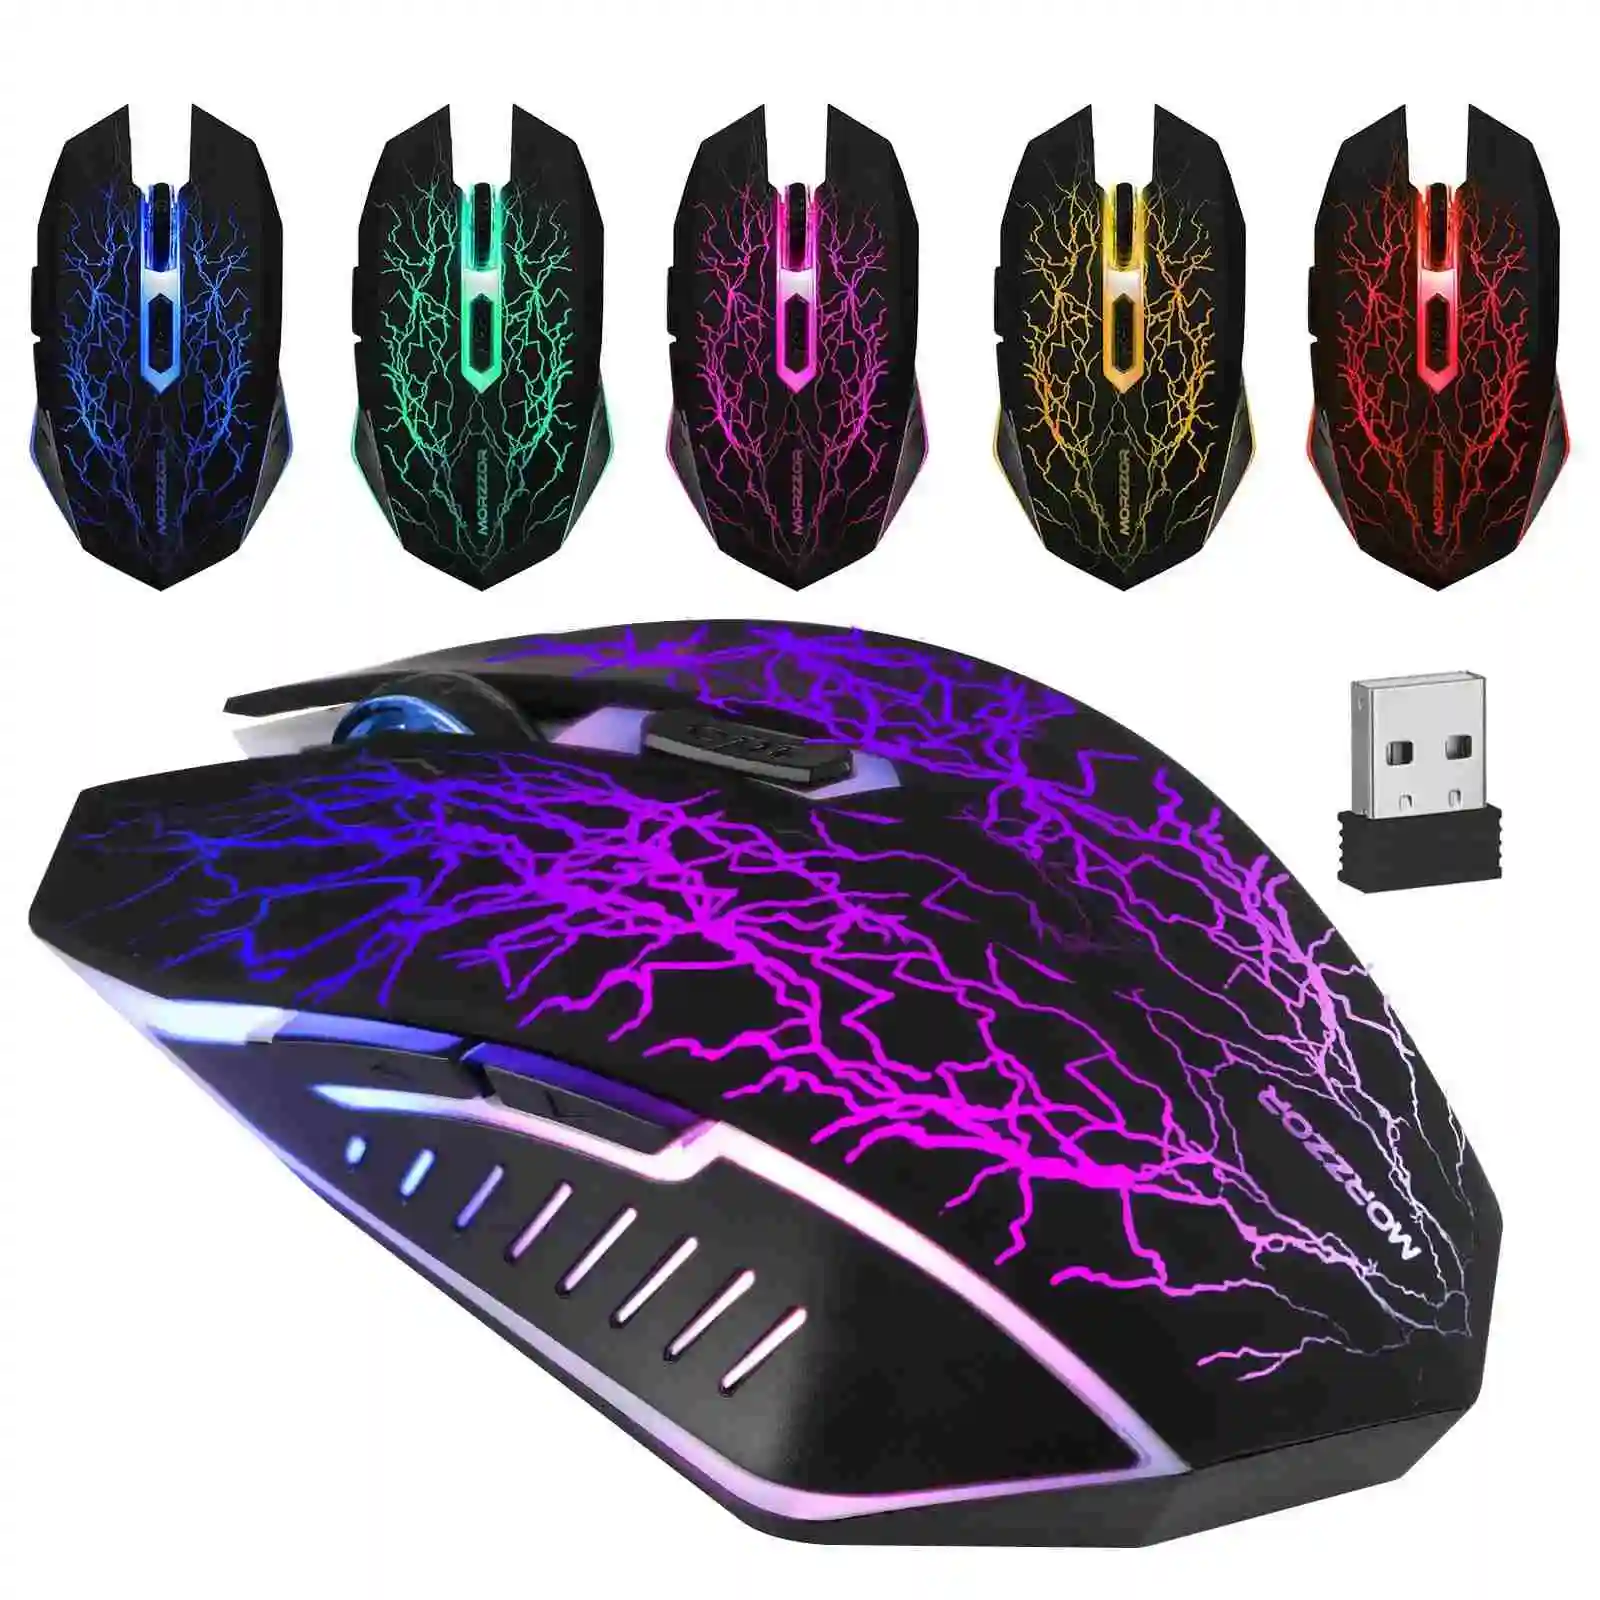 Buy best gaming Mouse at best price in Pakistan | Rhizmall.pk